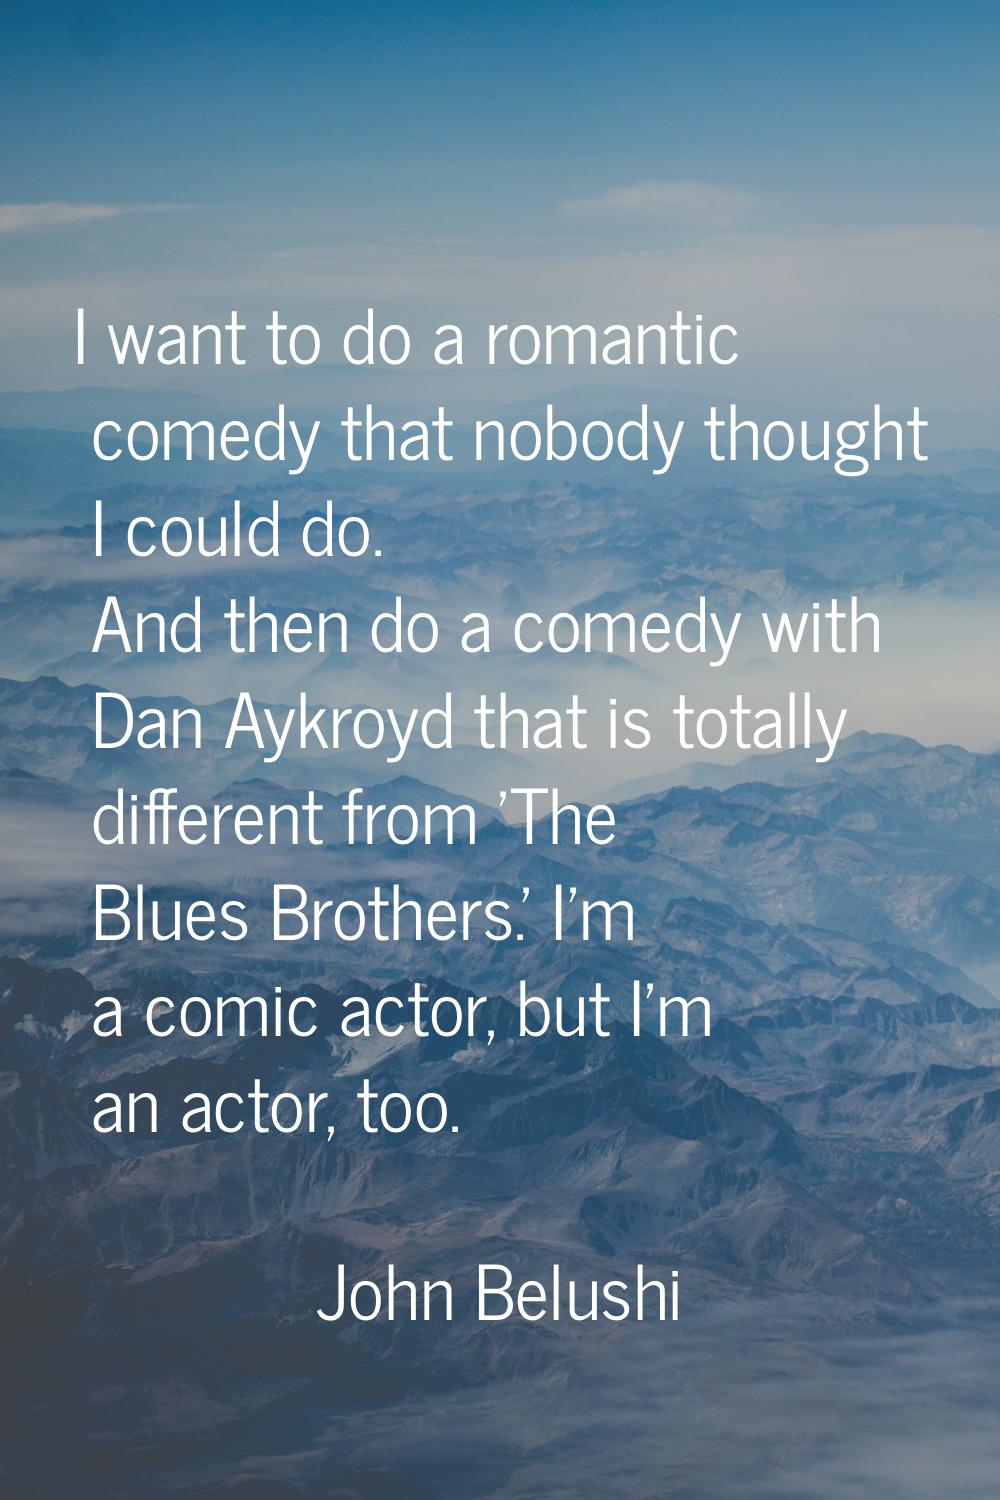 I want to do a romantic comedy that nobody thought I could do. And then do a comedy with Dan Aykroy